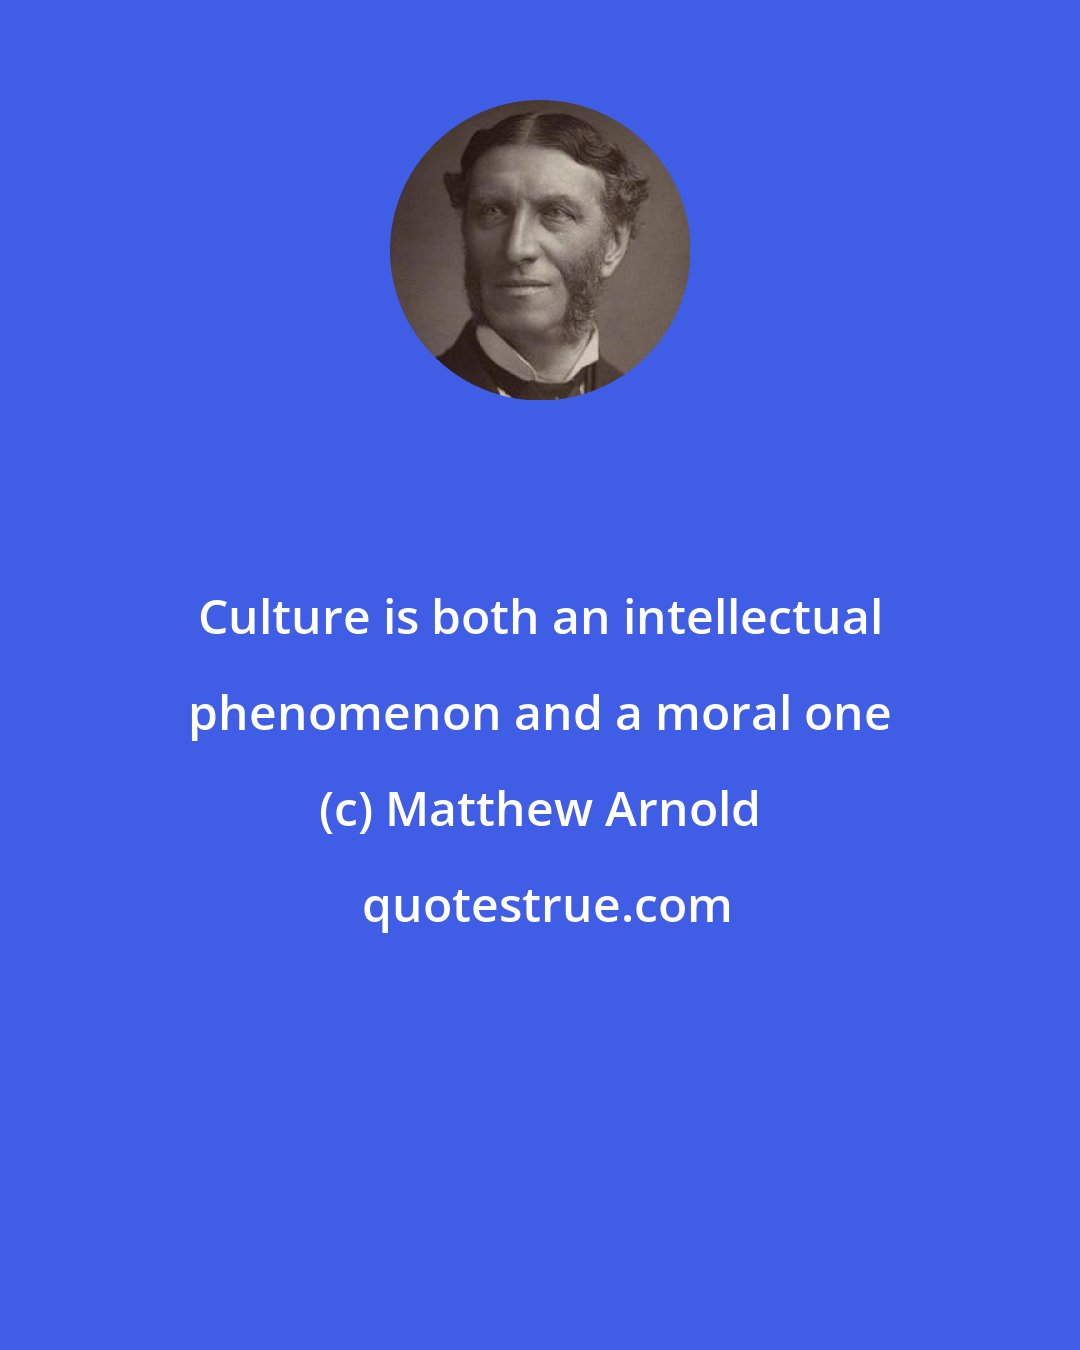 Matthew Arnold: Culture is both an intellectual phenomenon and a moral one